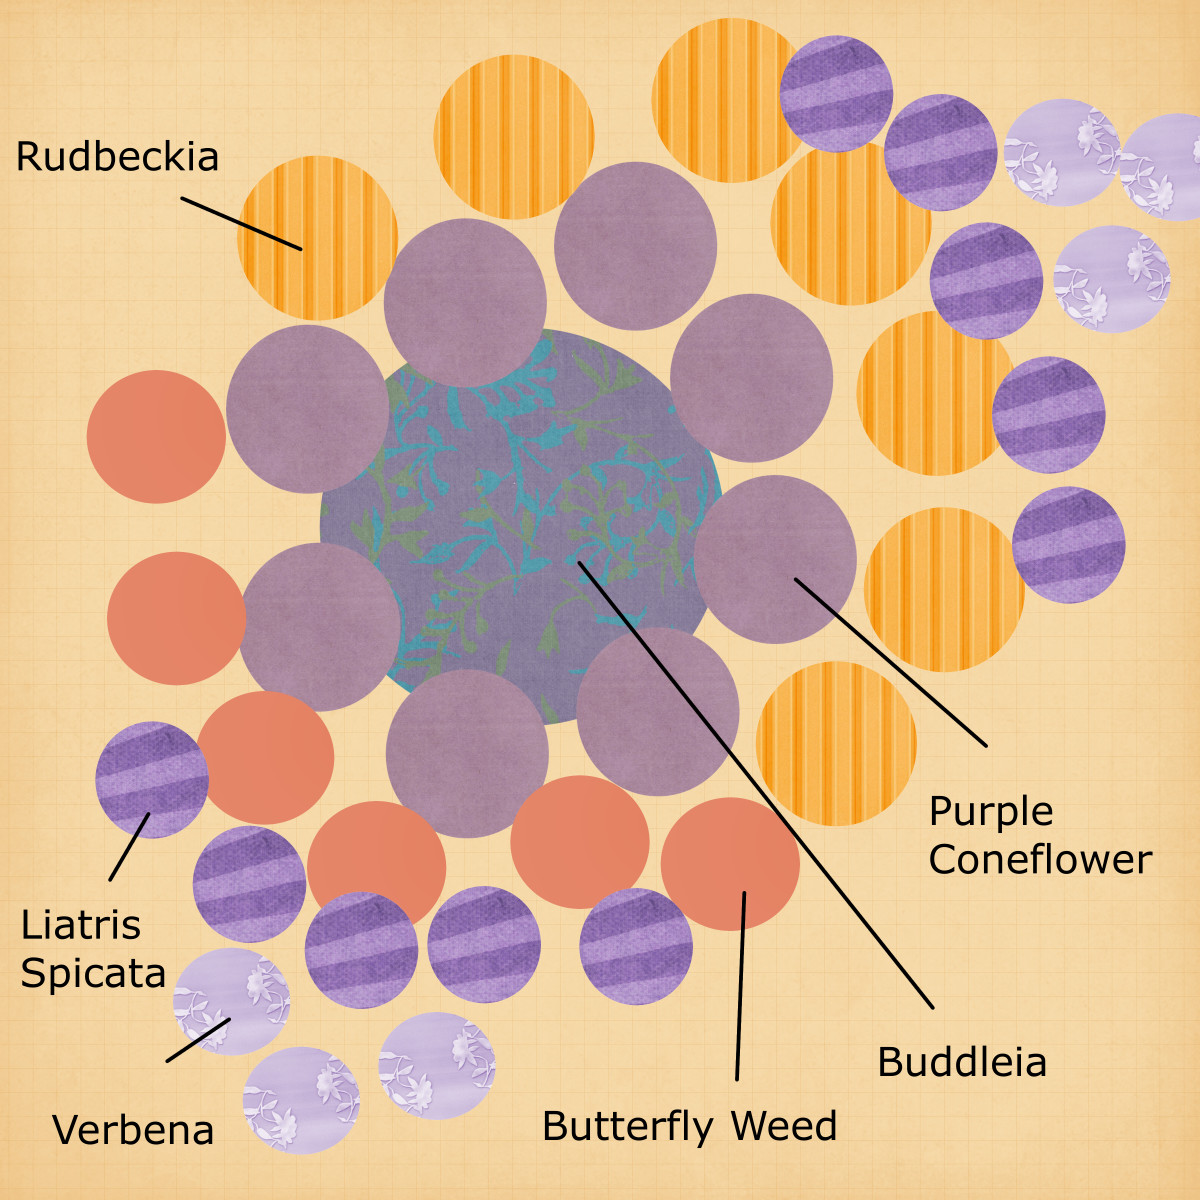 This butterfly garden plan will attract butterflies in droves. Buddleia (butterfly bush), purple coneflower, verbena, rudbeckia, and liatris are all loved by adult butterflies.